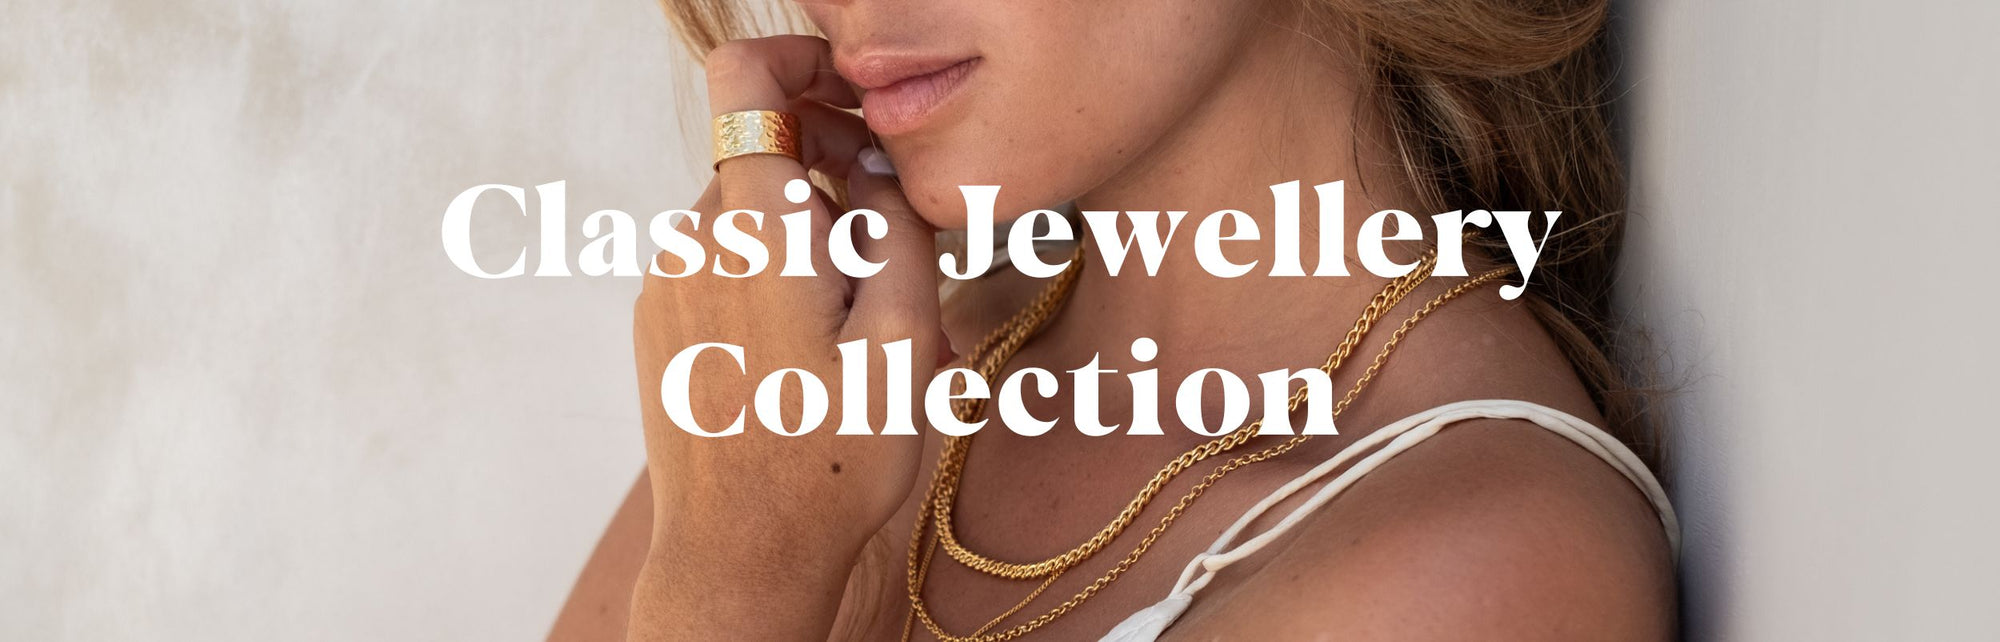 Classic Jewellery Collection